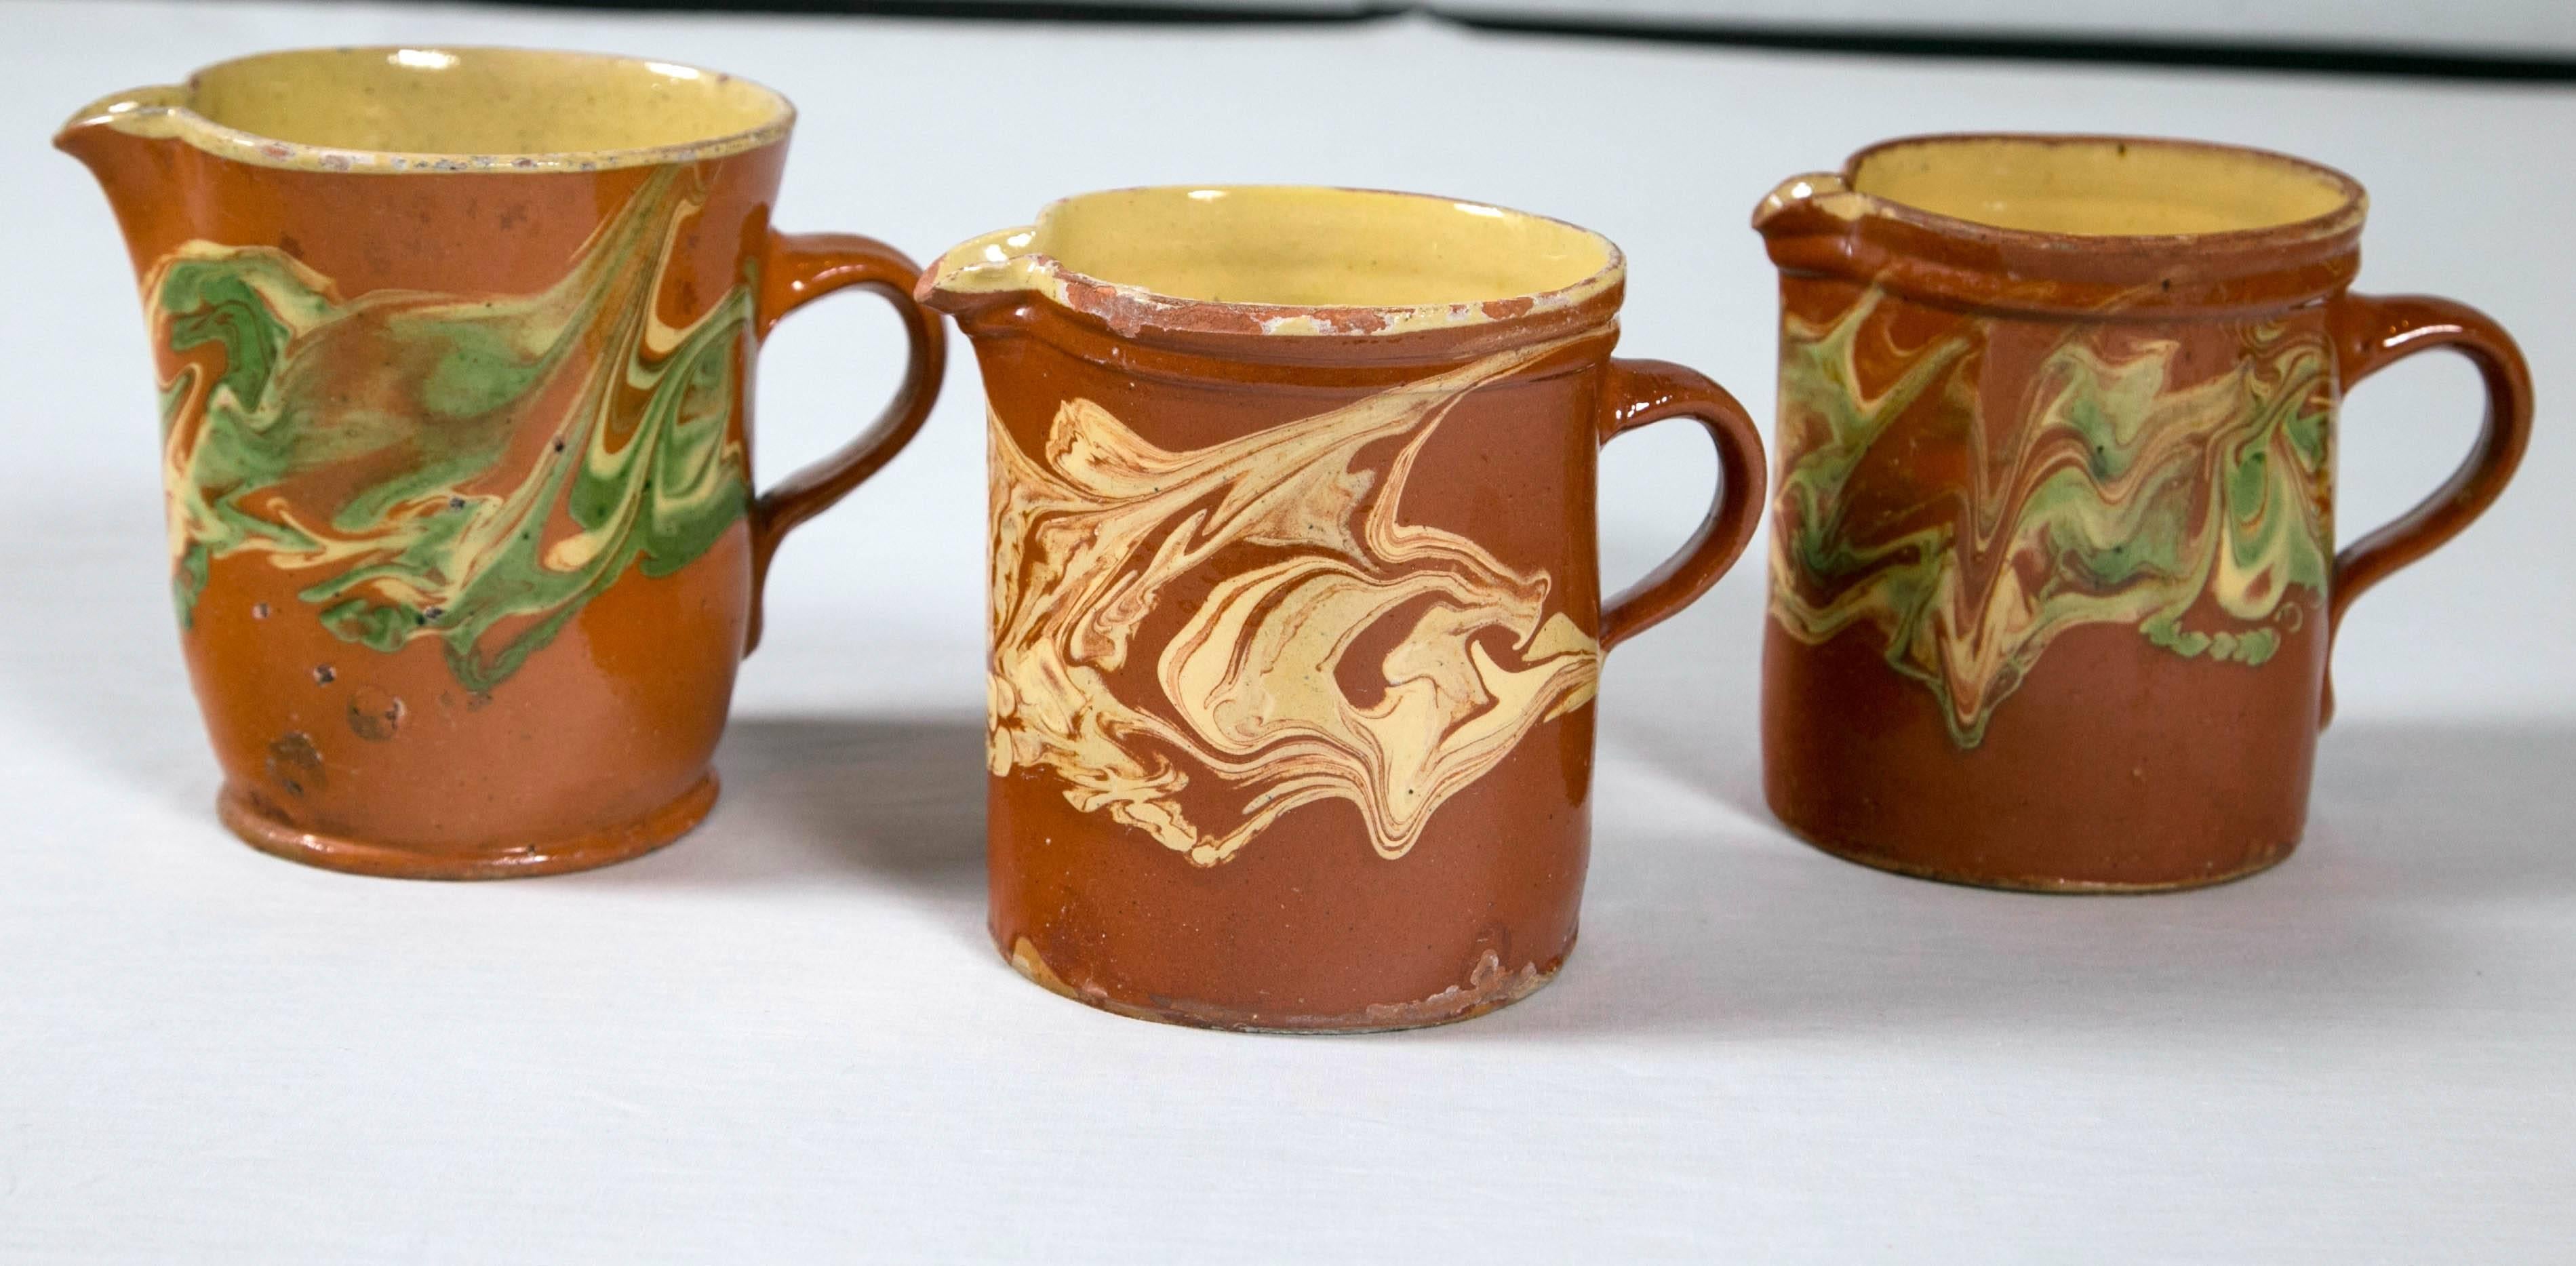 Three 'Jaspe' pottery pitchers from Alsace, France, circa 1900. Beautiful pale green and yellow swirl designs. Yellow glazed interior. Unglazed bottom indicating age. Size range: Height - 5-1/2 to 6 inches, Width - 4-3/4 to 5 inches.